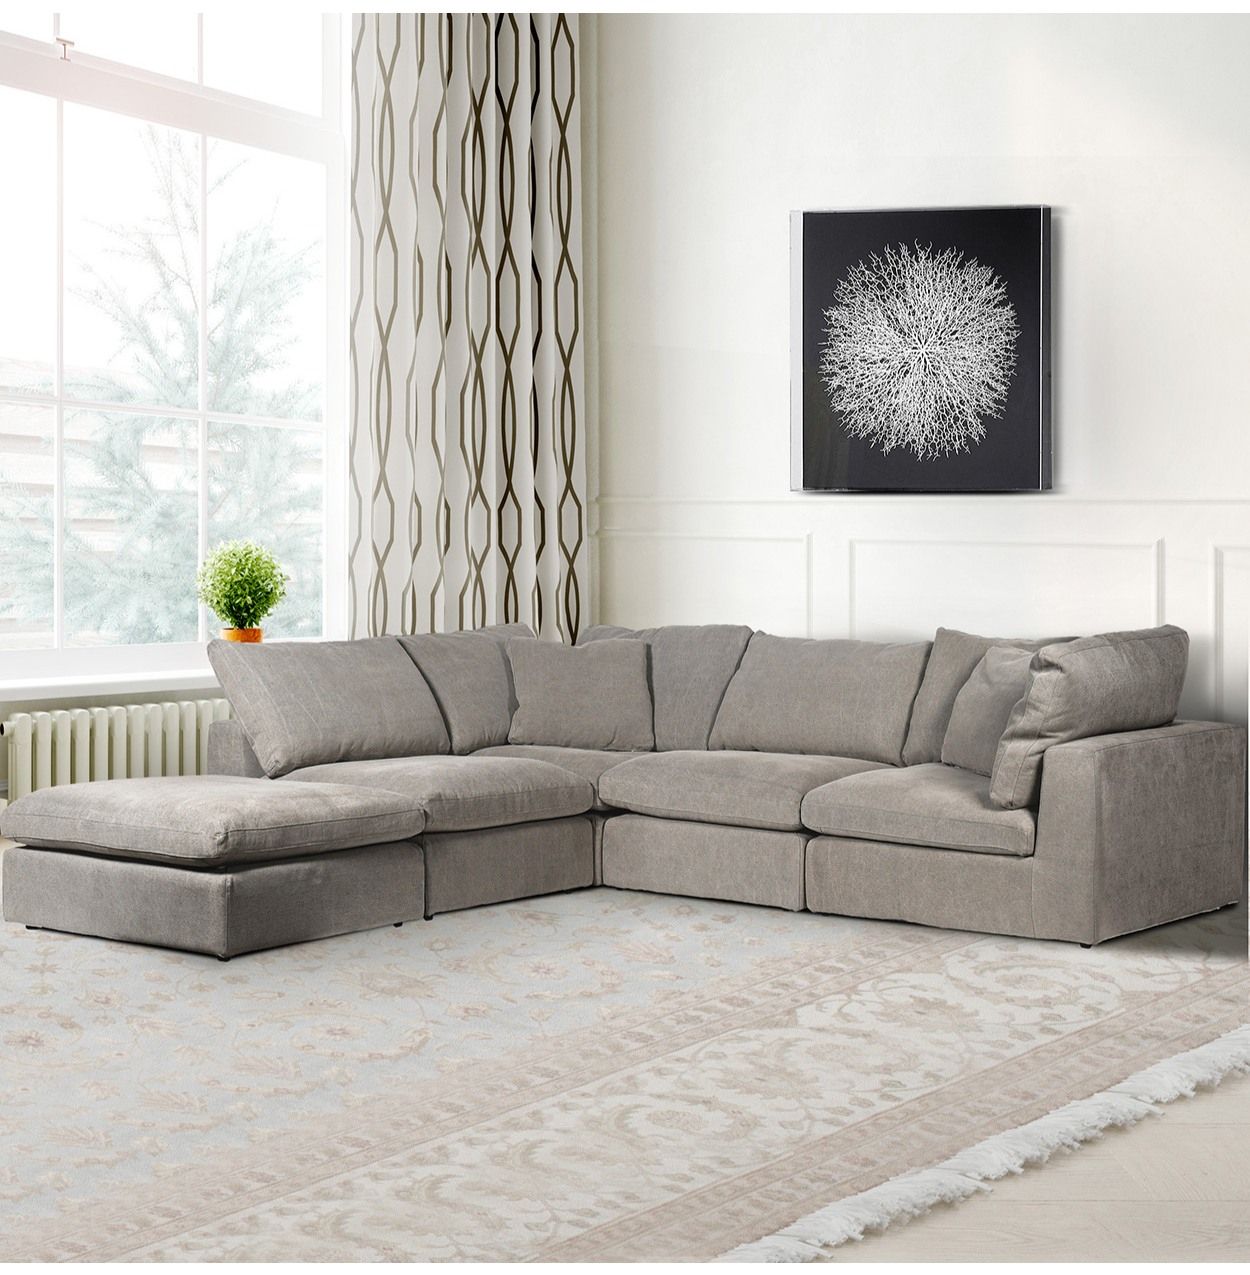 Stone Grey Linen Adjustable Corner Sofa | Nicky Cornell Throughout Light Charcoal Linen Sofas (View 8 of 15)